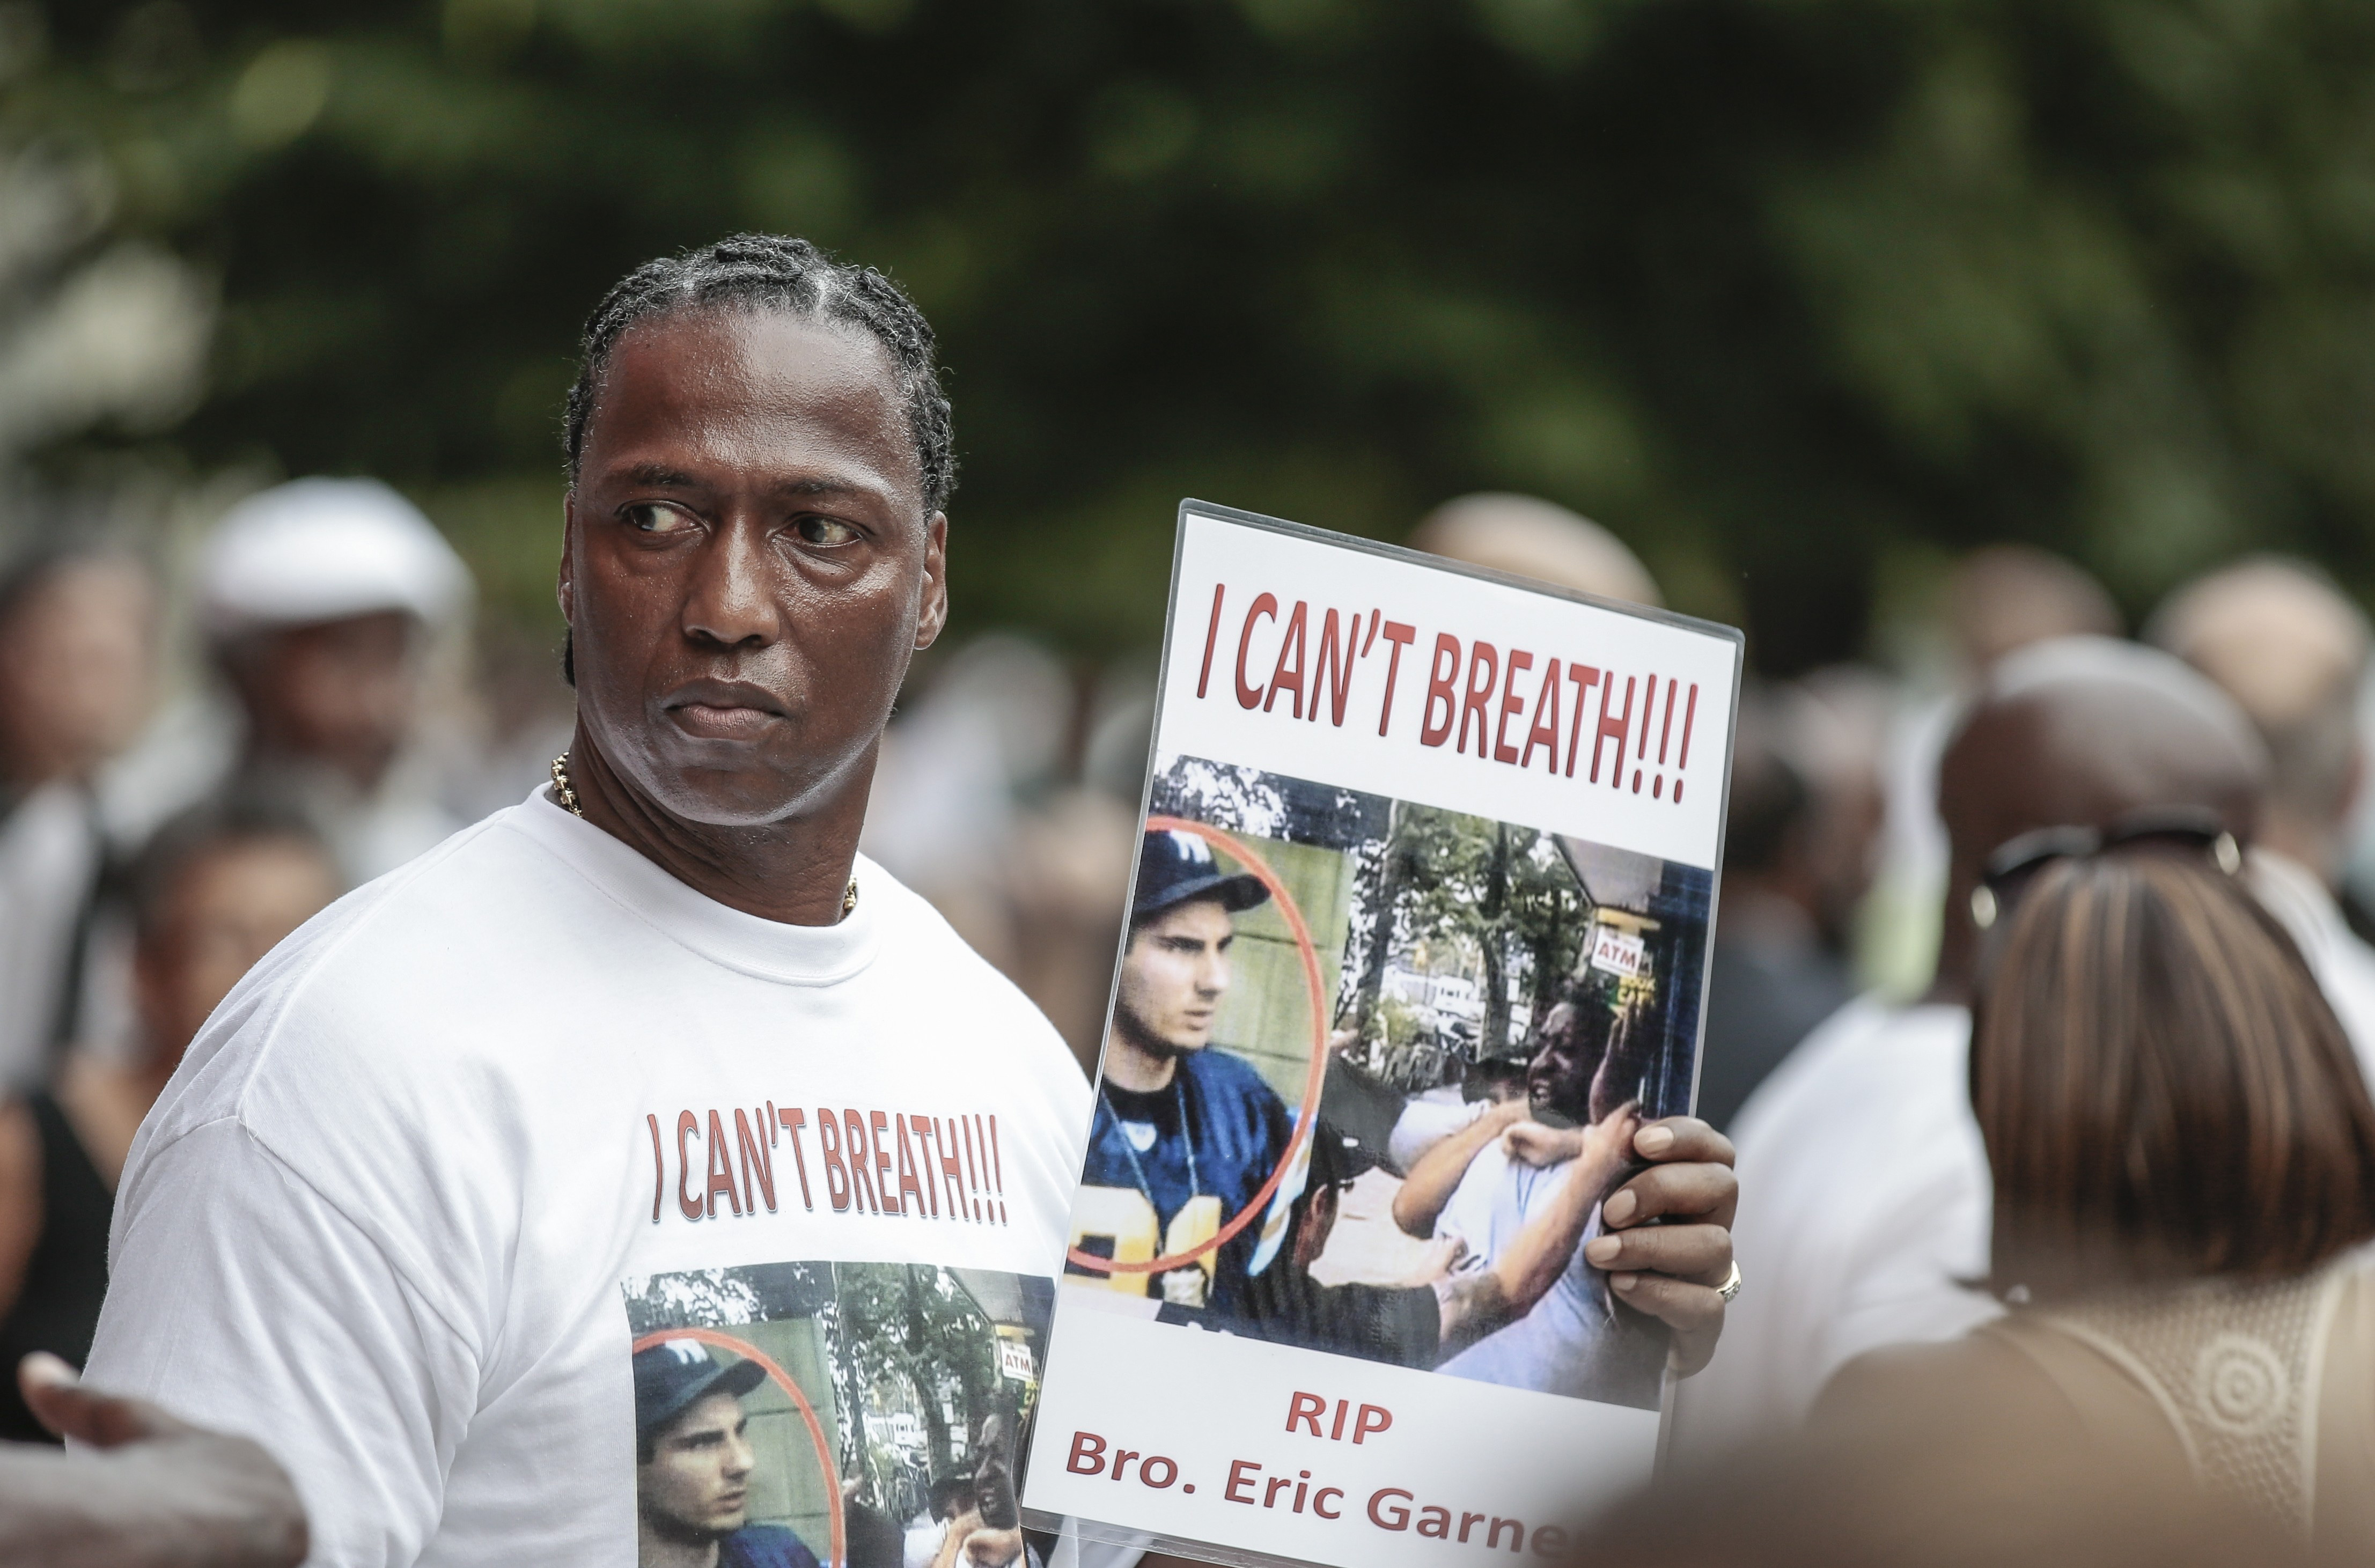 People and relatives attend the funeral ceremony of Eric Garner who died after NYPD cops put him in a banned chokehold, 